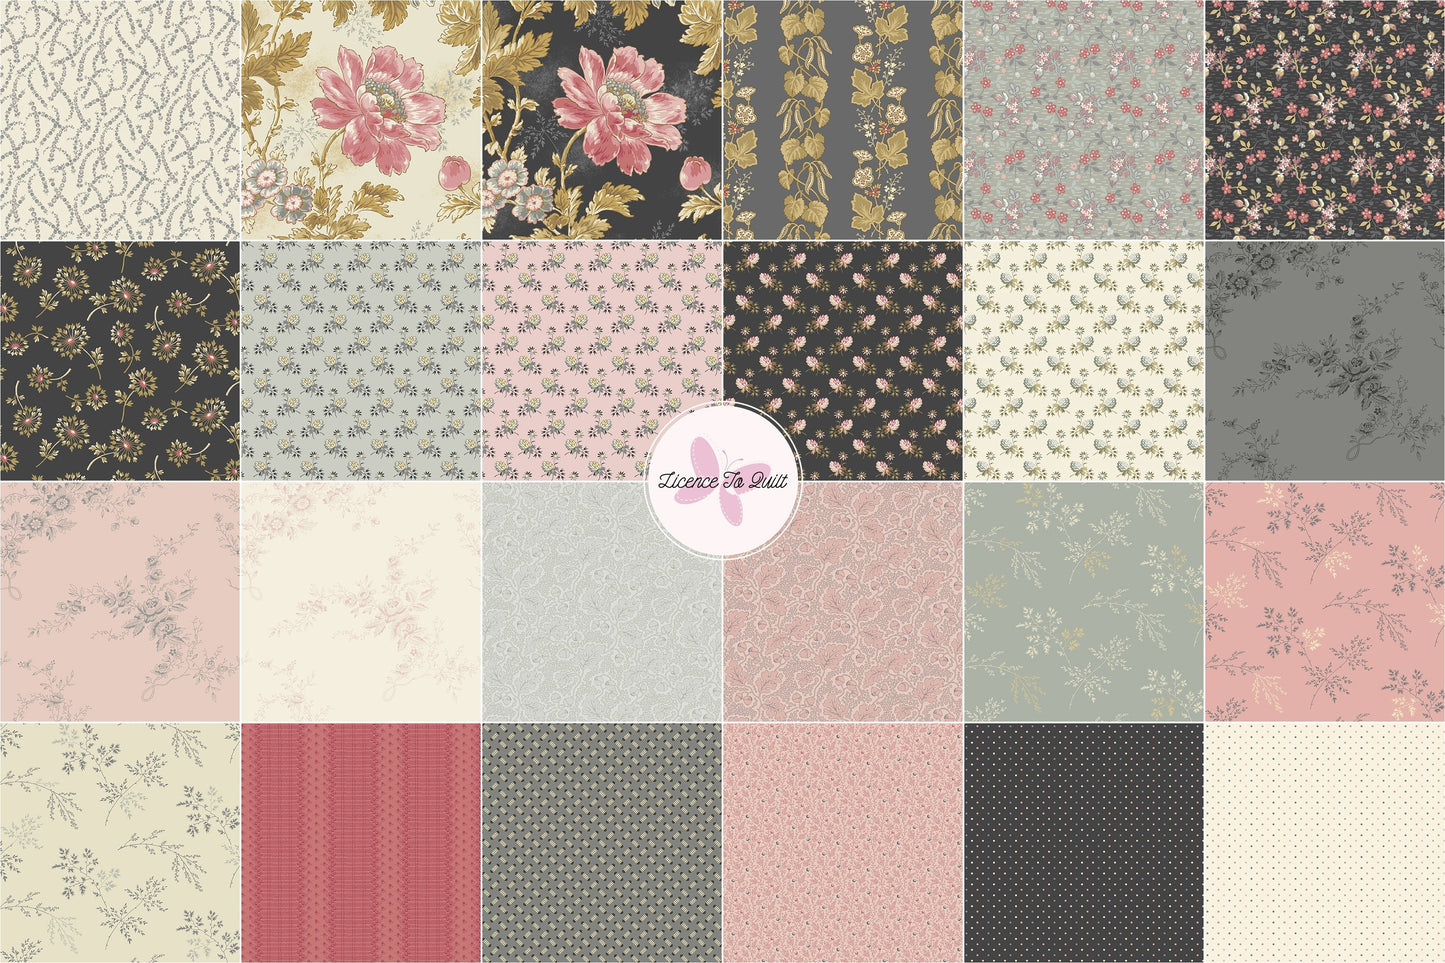 Moonstone - Coal Clover - Licence To Quilt